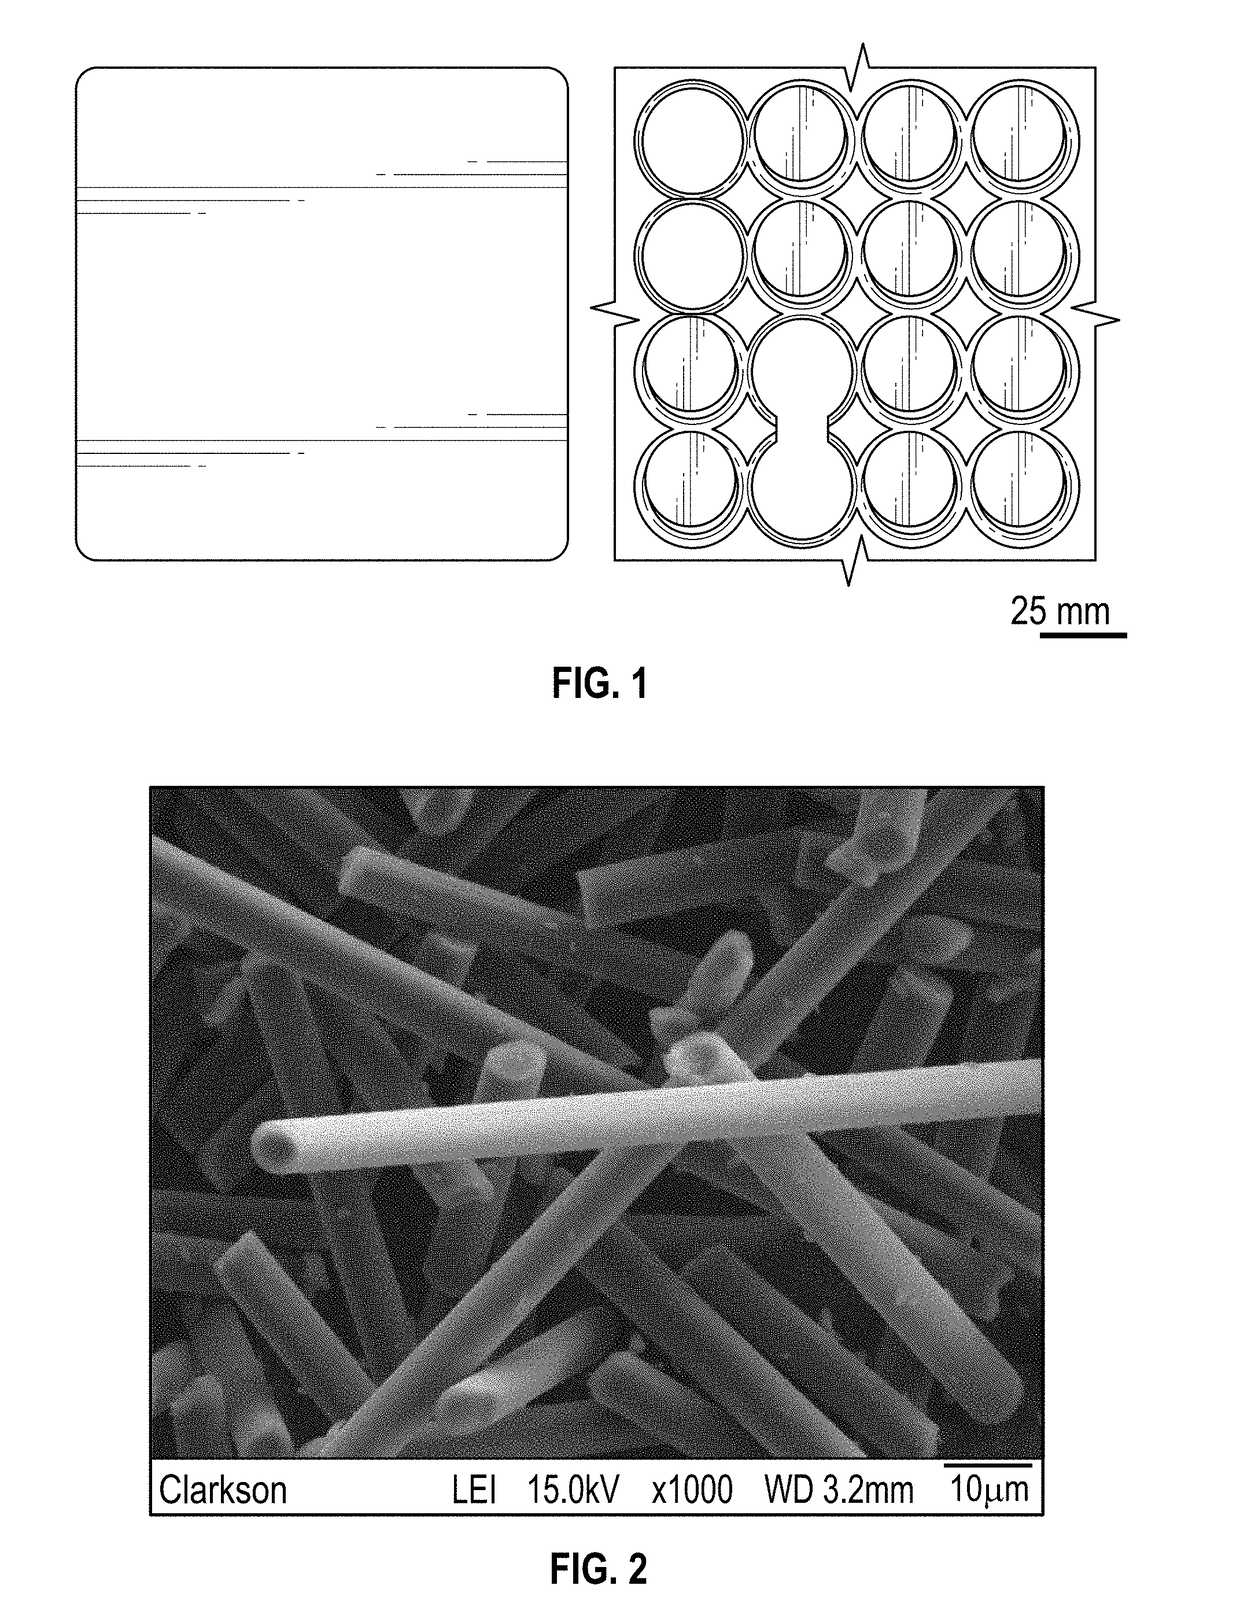 Filled elastomers with improved thermal and mechanical properties